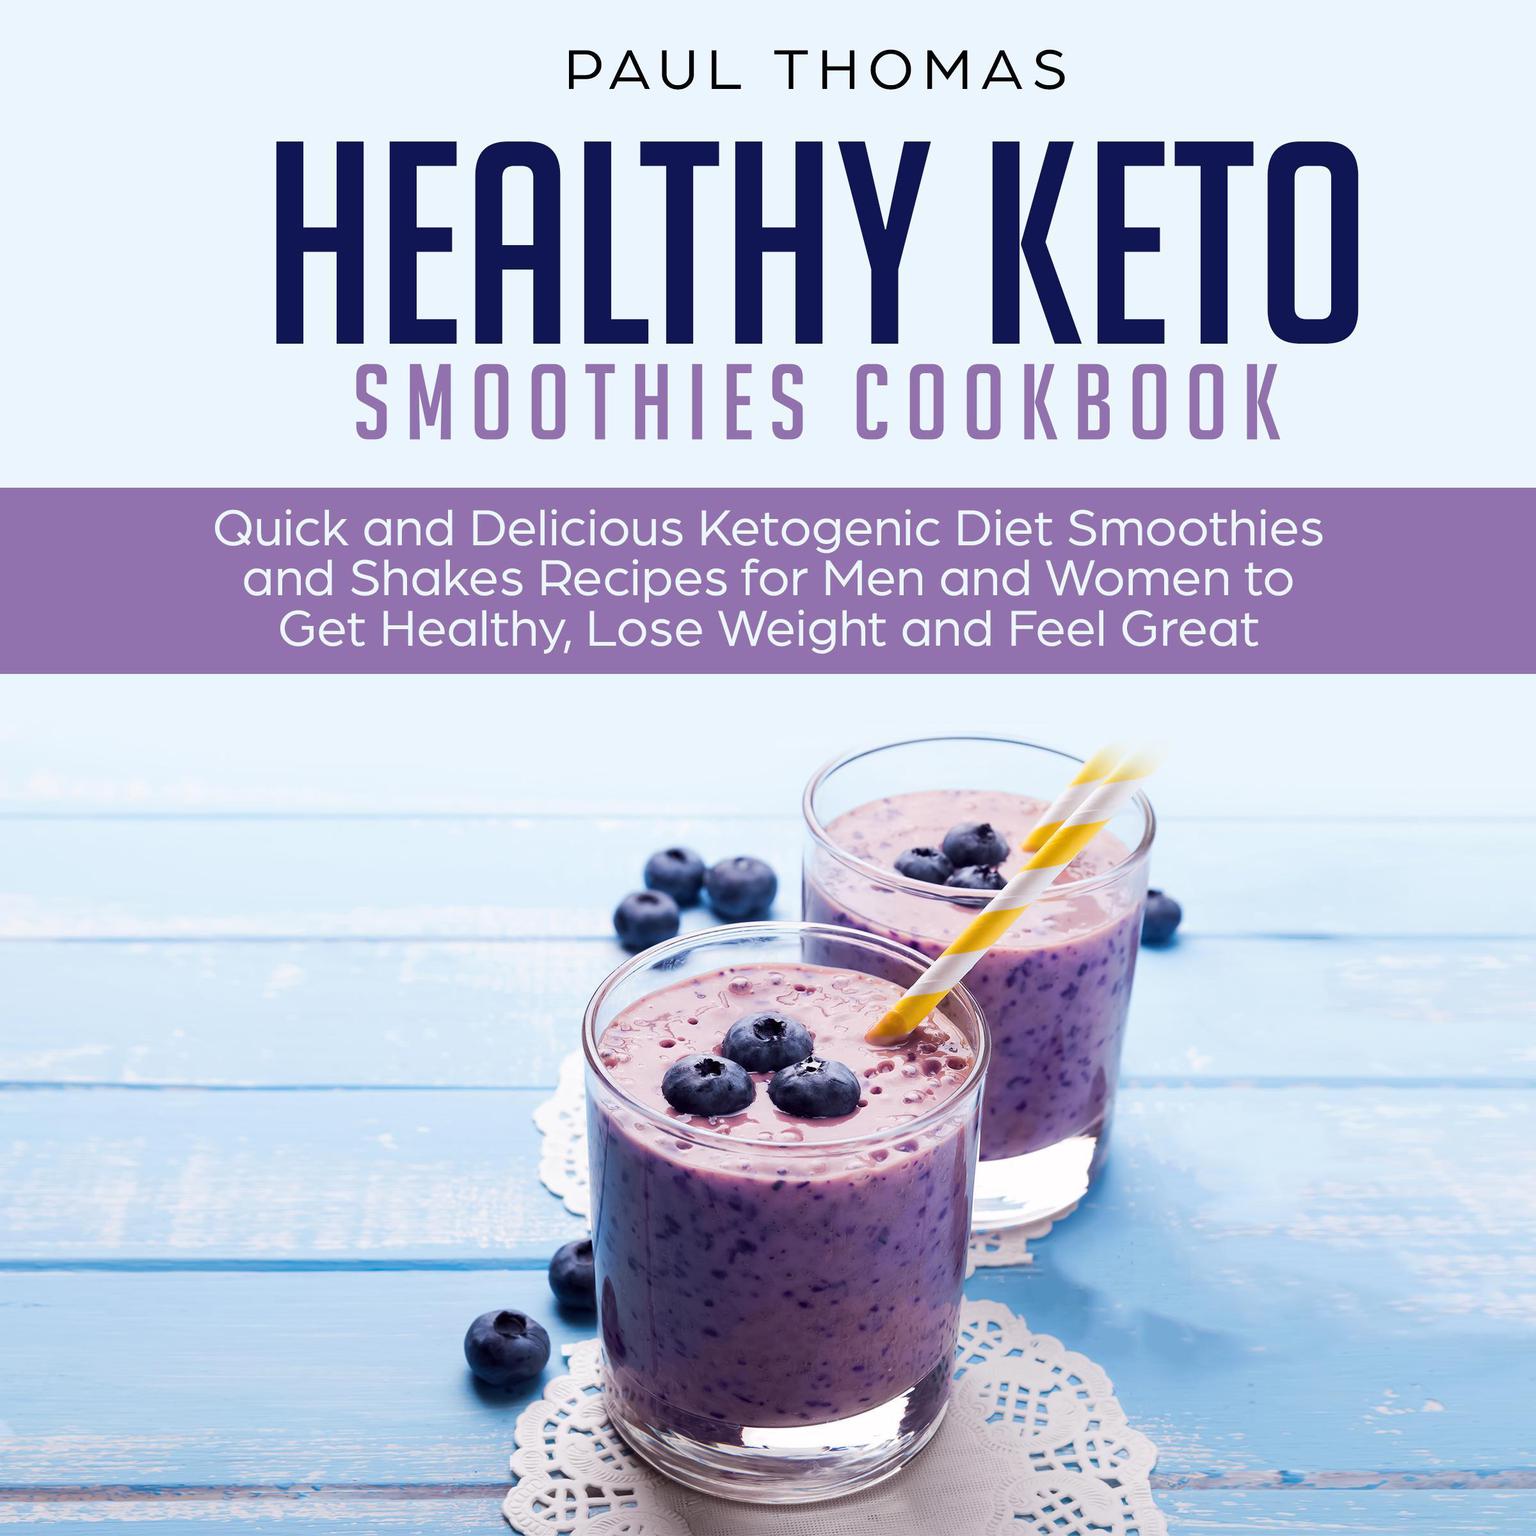 Healthy Keto Smoothies Cookbook: Quick and Delicious Ketogenic Diet Smoothies and Shakes Recipes for Men and Women to Get Healthy, Lose Weight and Feel Great Audiobook, by Paul Thomas